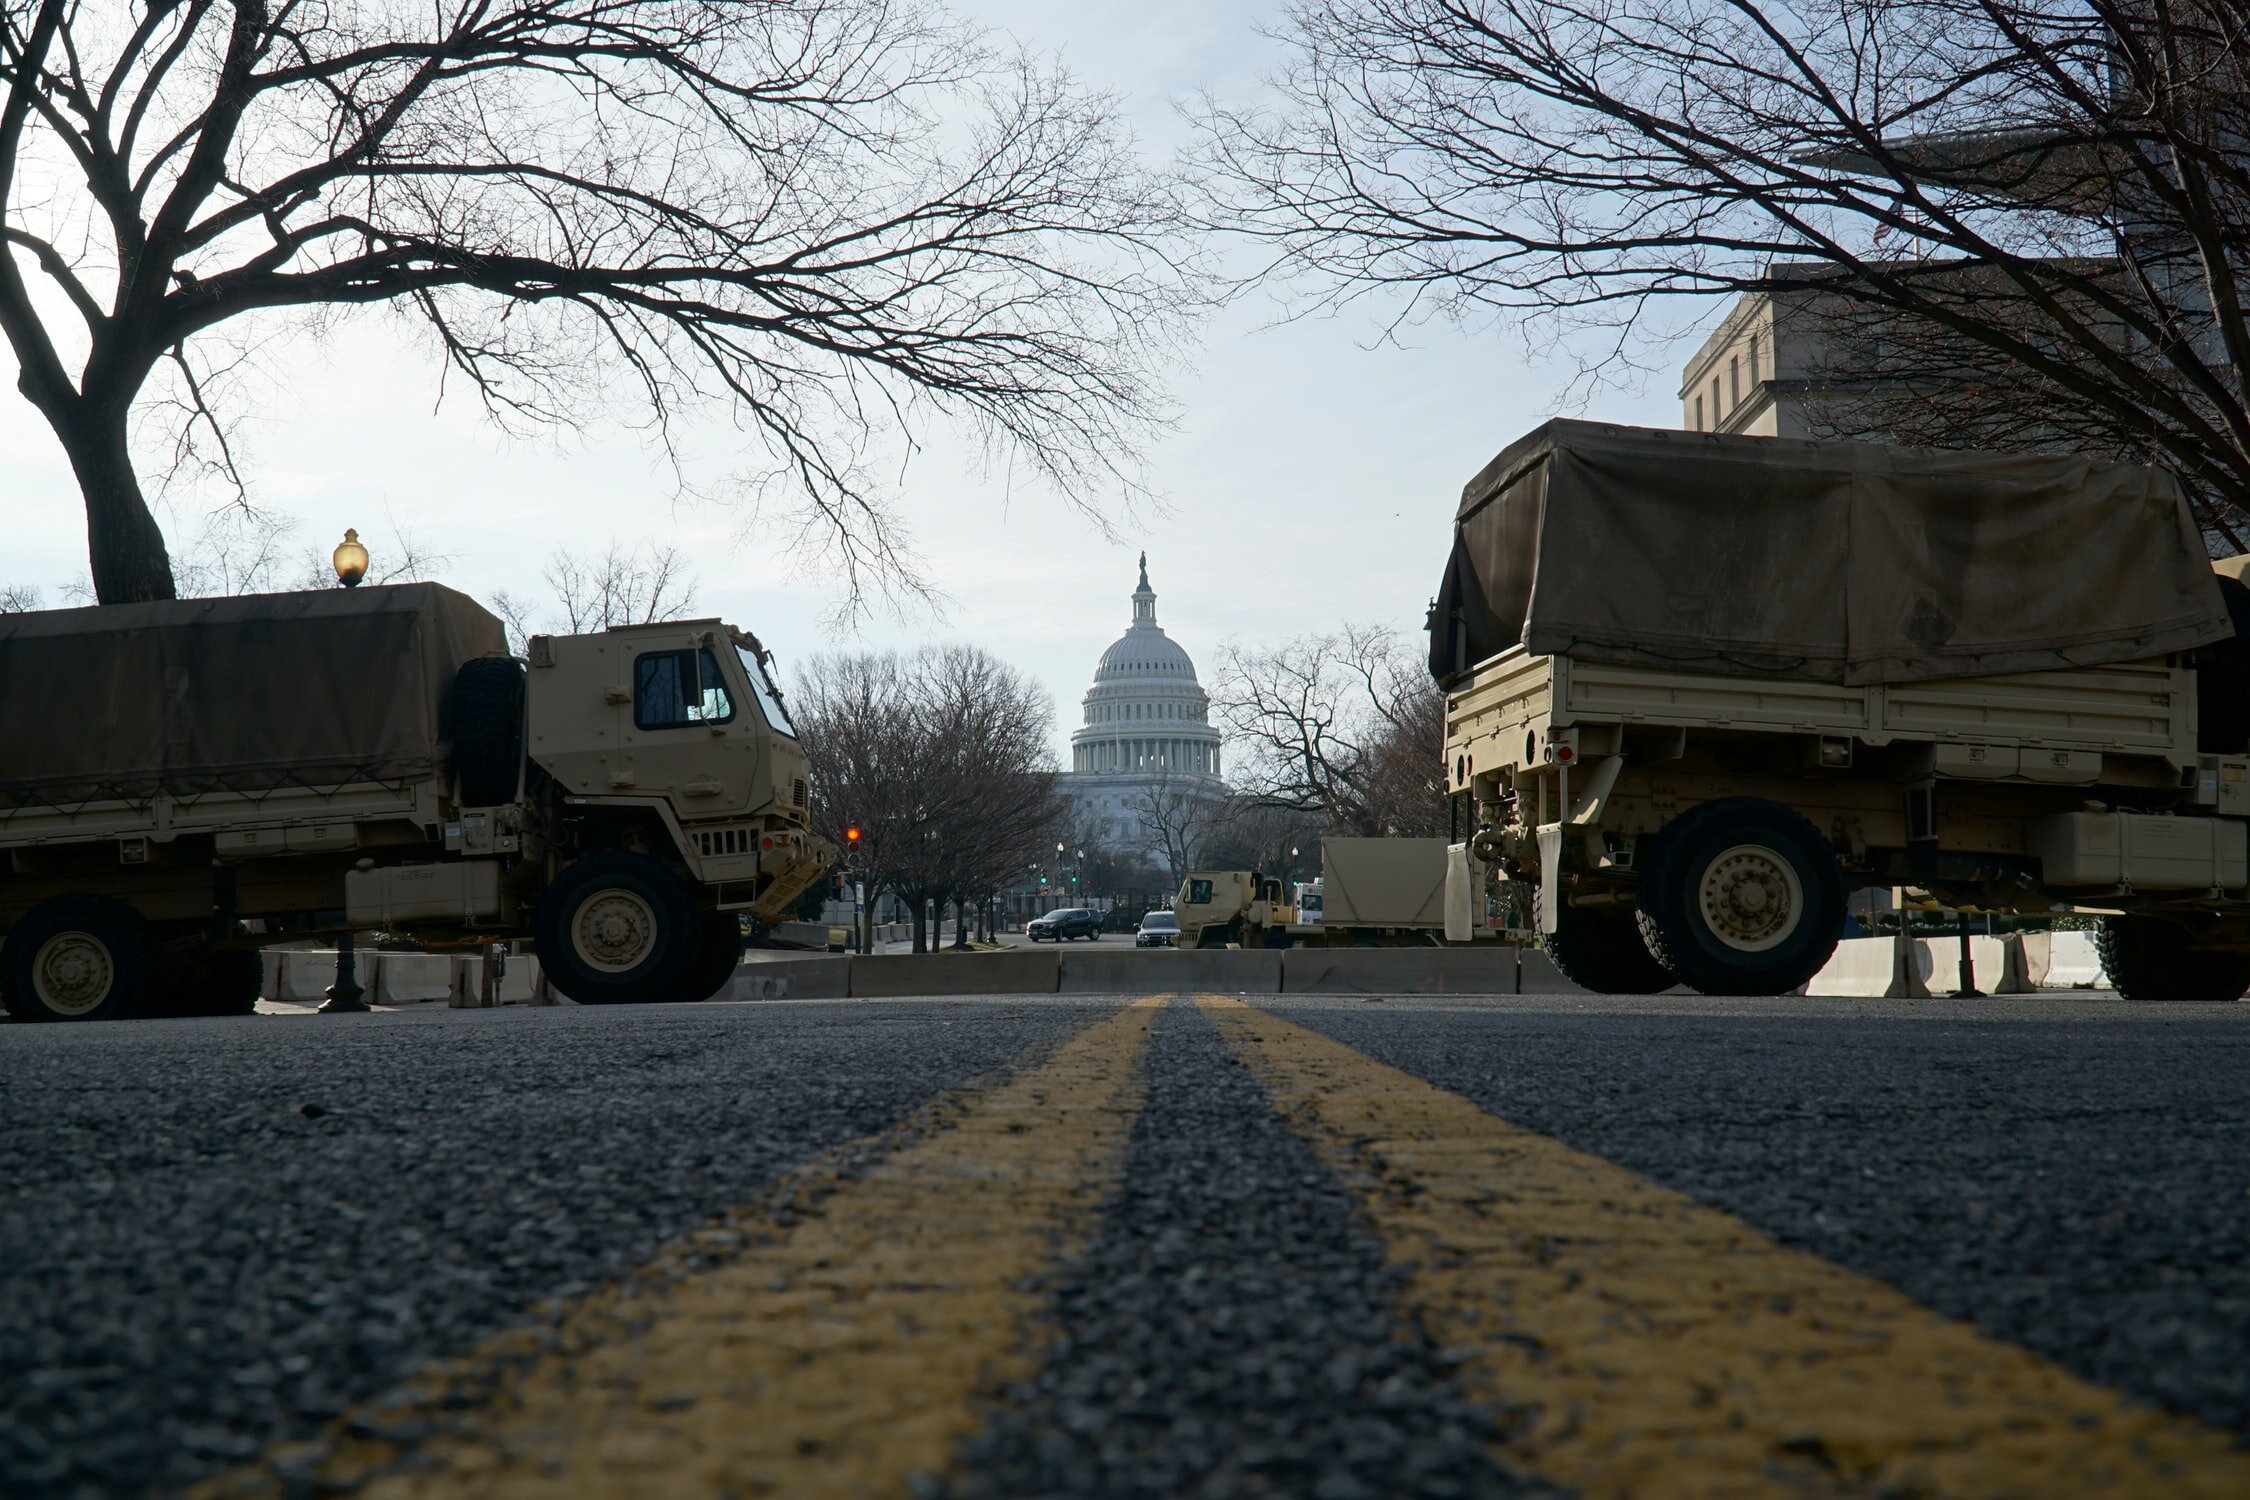 National Guard trucks parked on the street near the US Capitol. Photograph courtesy of Ian Hutchinson on Unsplash.com.